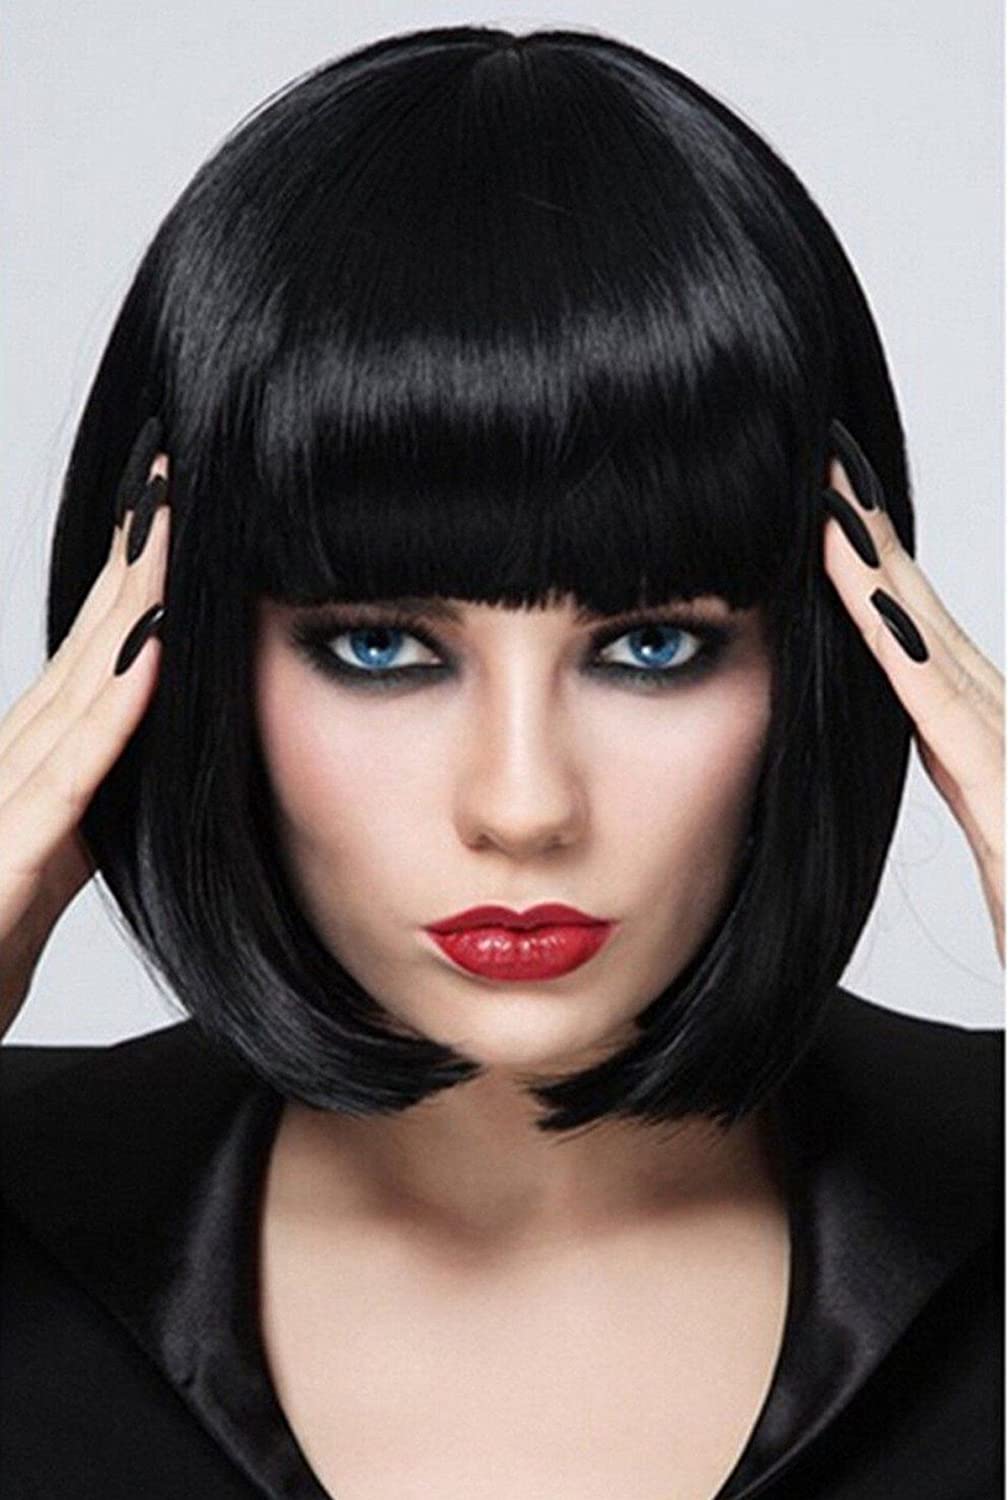 Price:$14.65     Short Bob Wigs Black Wig for Women with Bangs Straight Synthetic Wig Natural As Real Hair 12'' BU027BK   Beauty